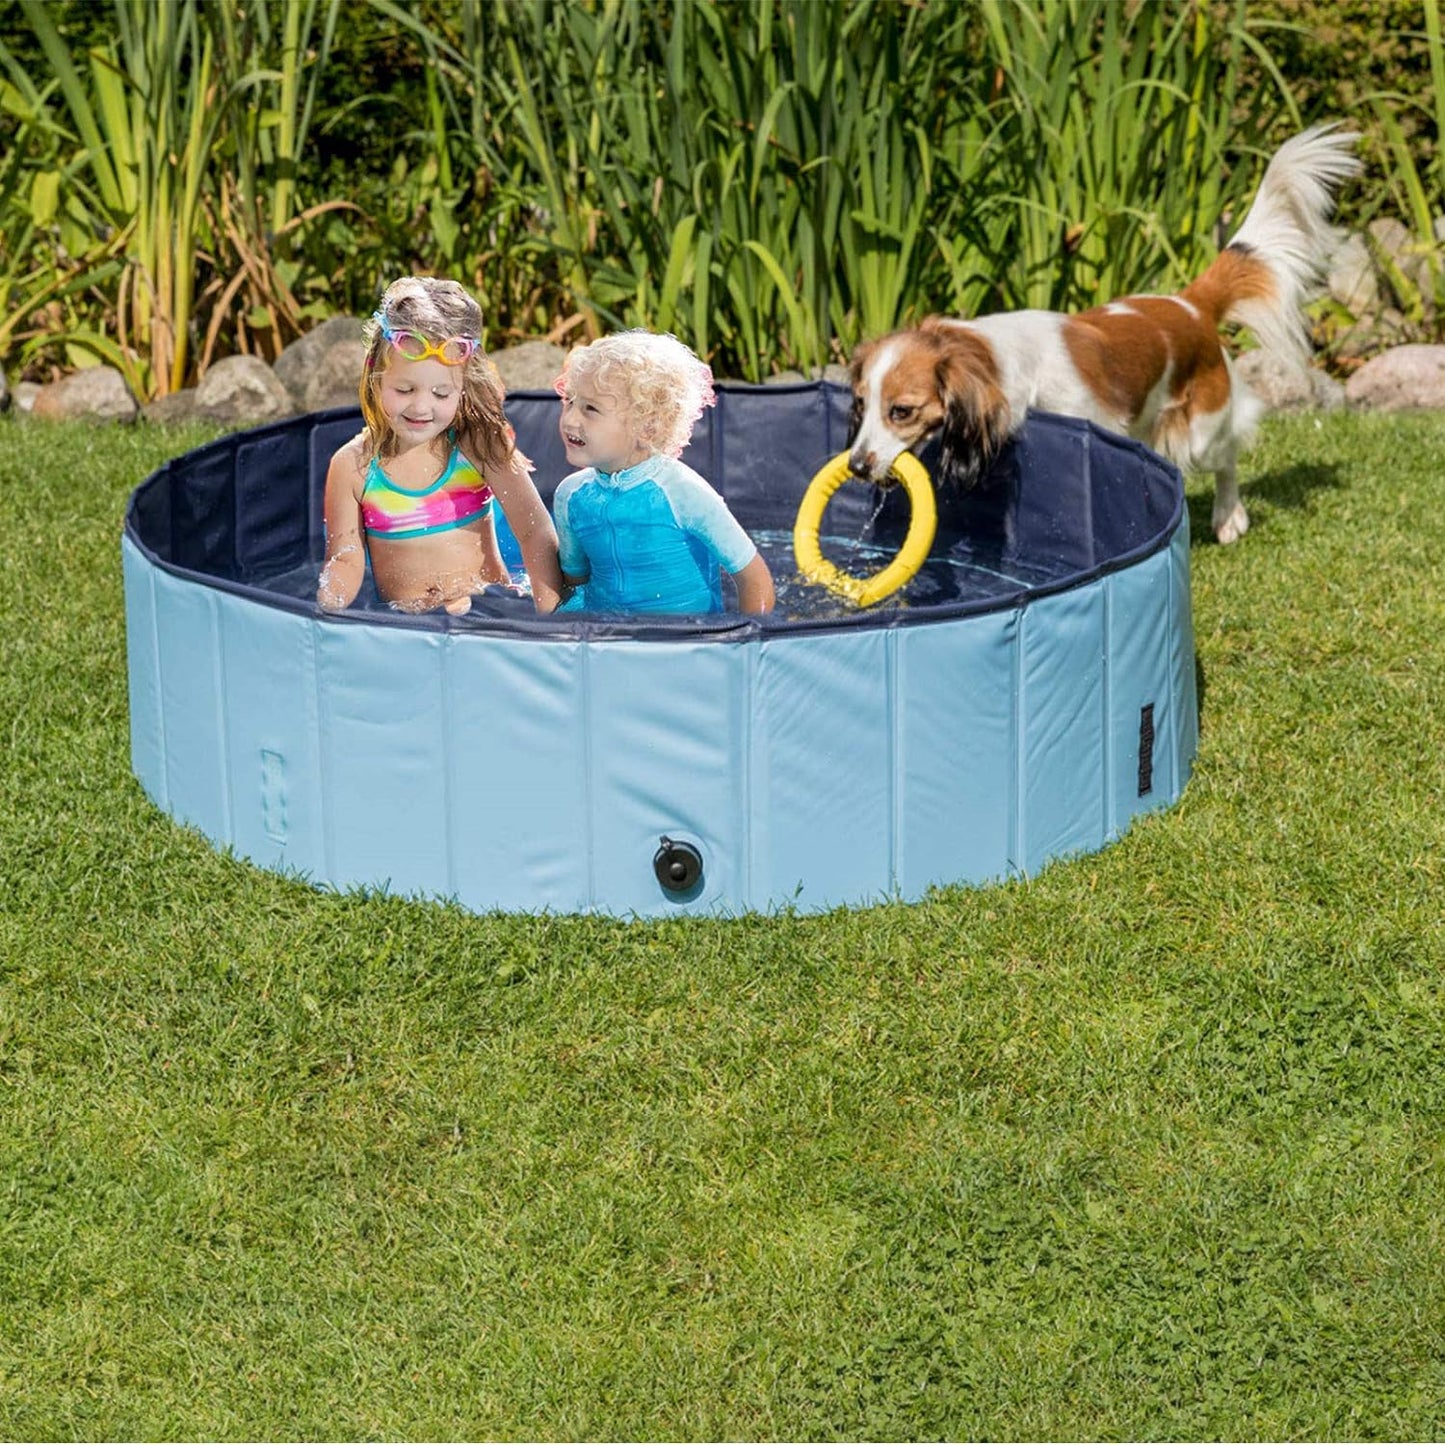 Dog Pool Foldable Pet Outdoor Swimming Pool Collapsible Anti-Slip Hard PVC Pet Paddling Bathtub for Large and Xtra Large Dogs, Kids, Pets((63'' * 12'')/(160Cm X 30Cm))